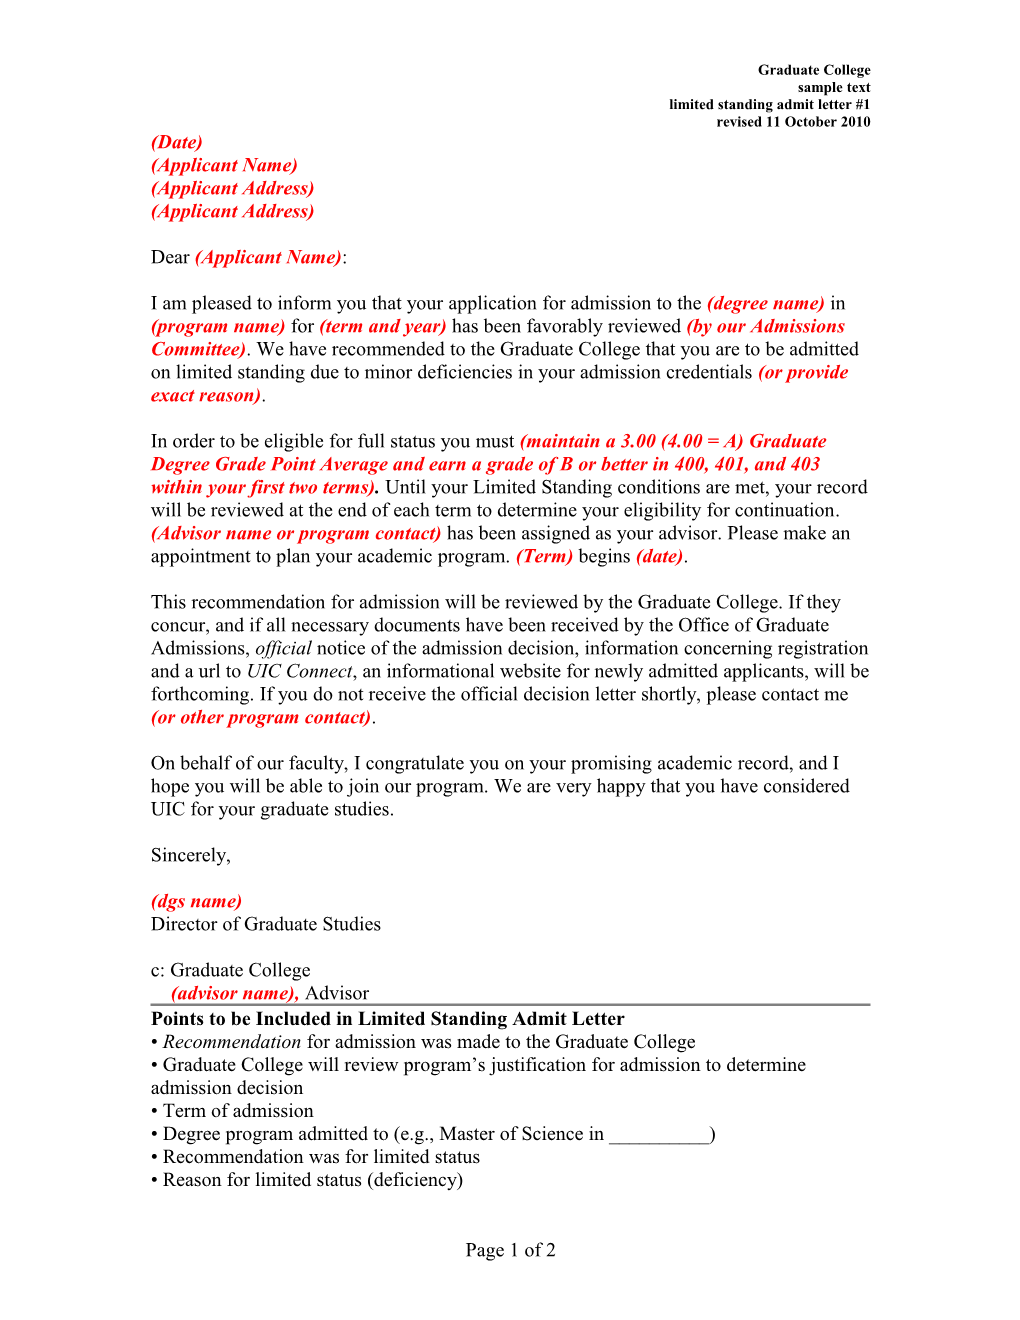 Limited Status Admit Letter